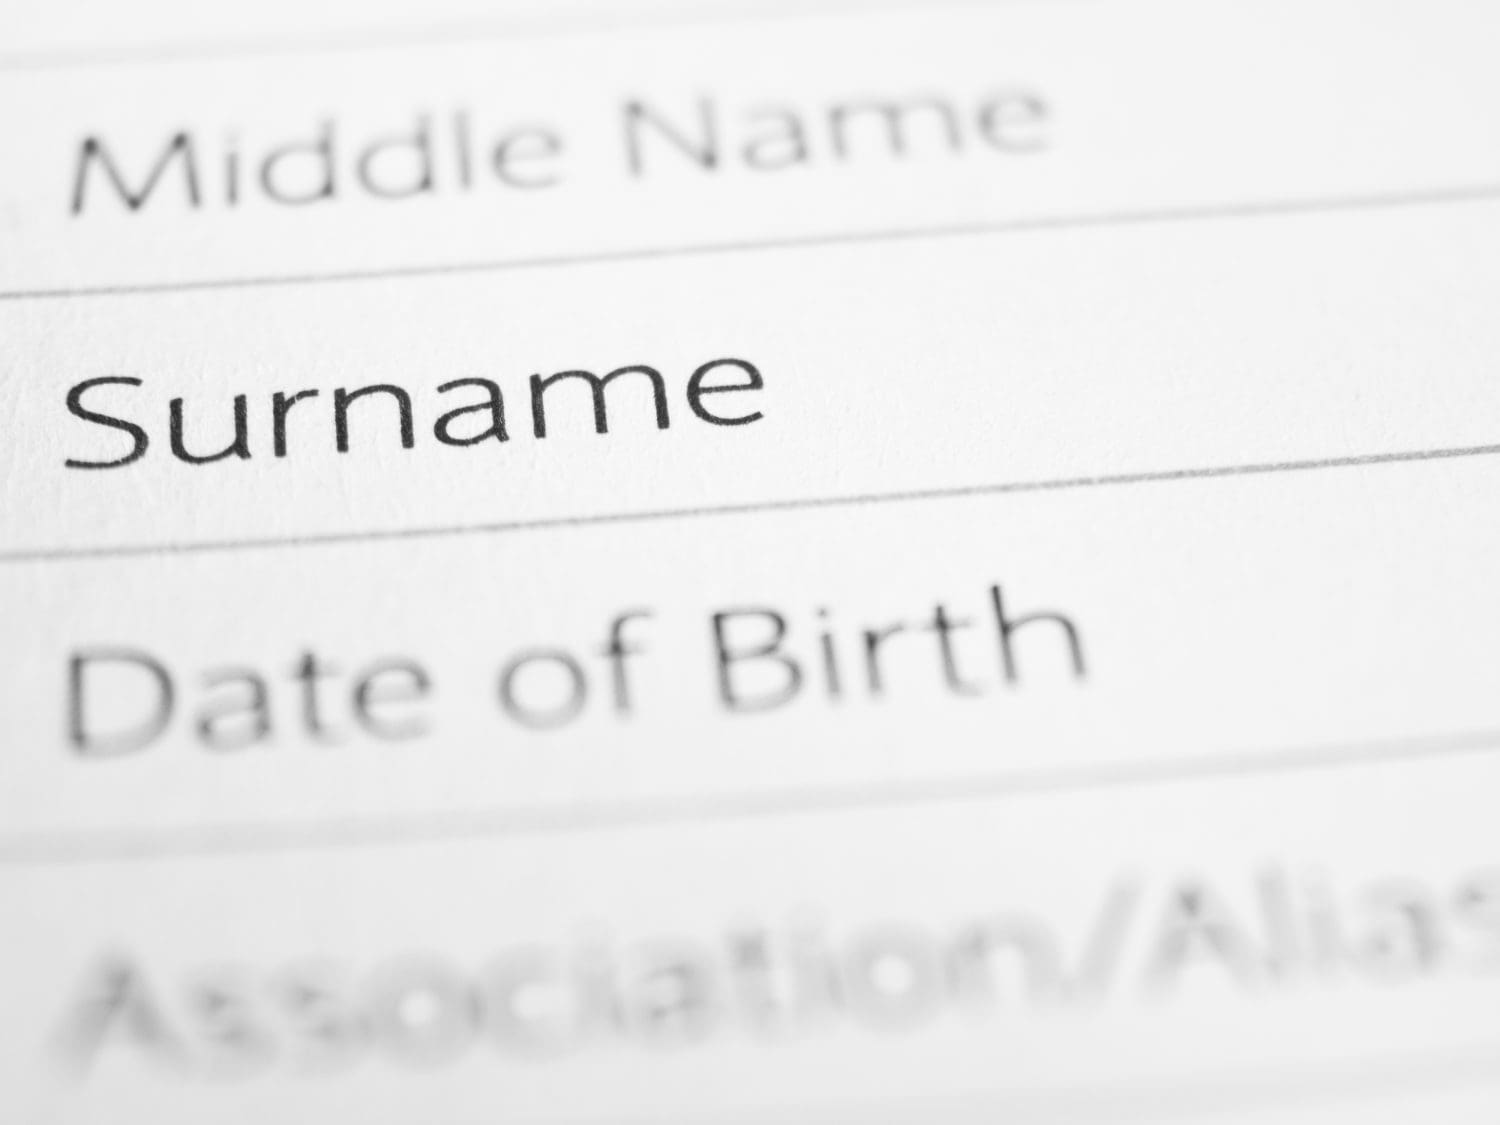 SURNAME close up on a printed form